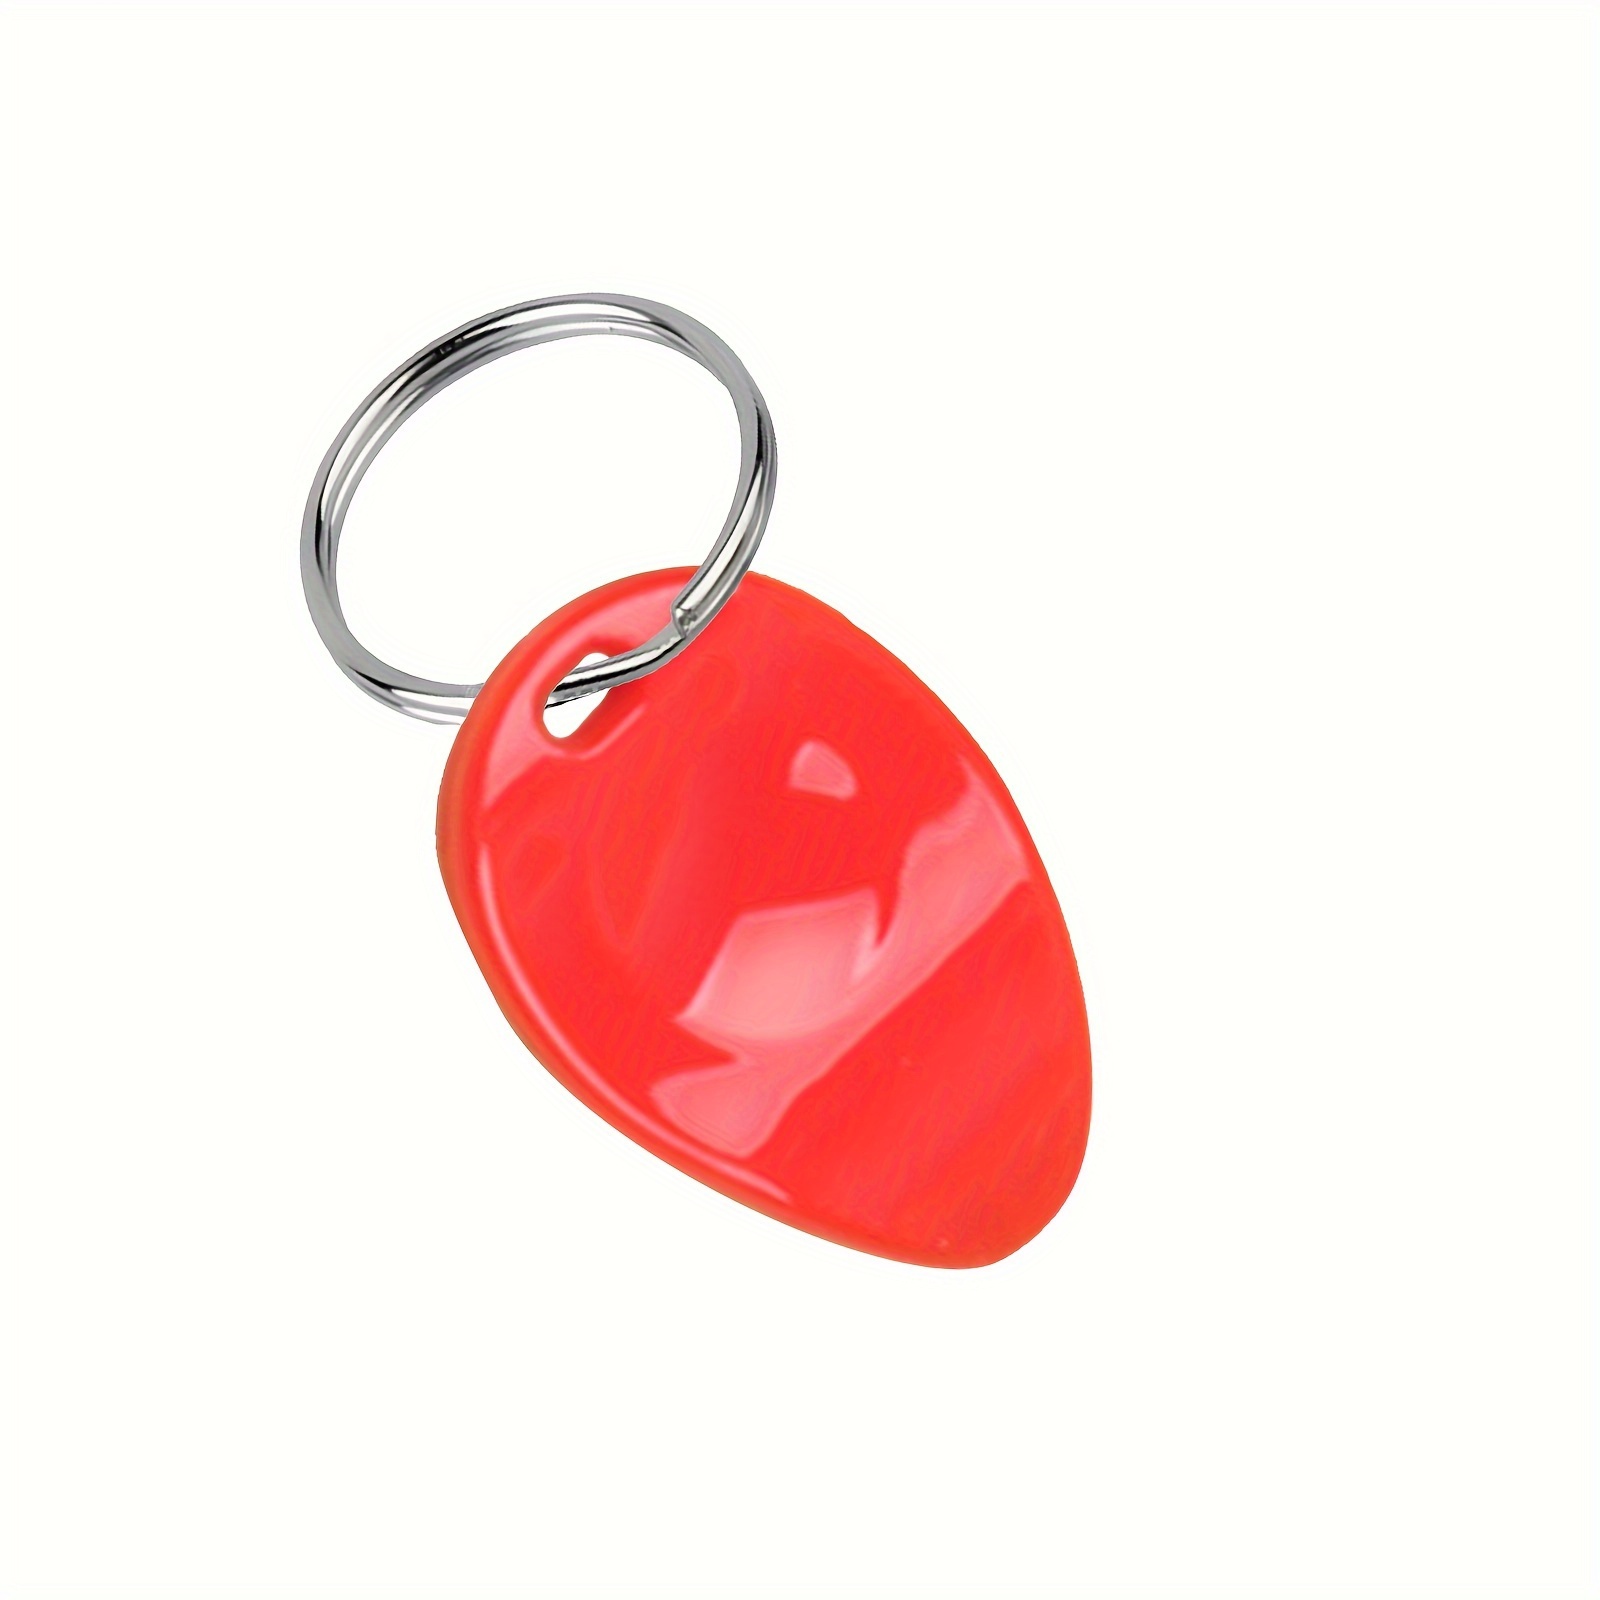 Lottery Scratcher Tool Keychain, Ice Scoop Shape Scratch Off Tool